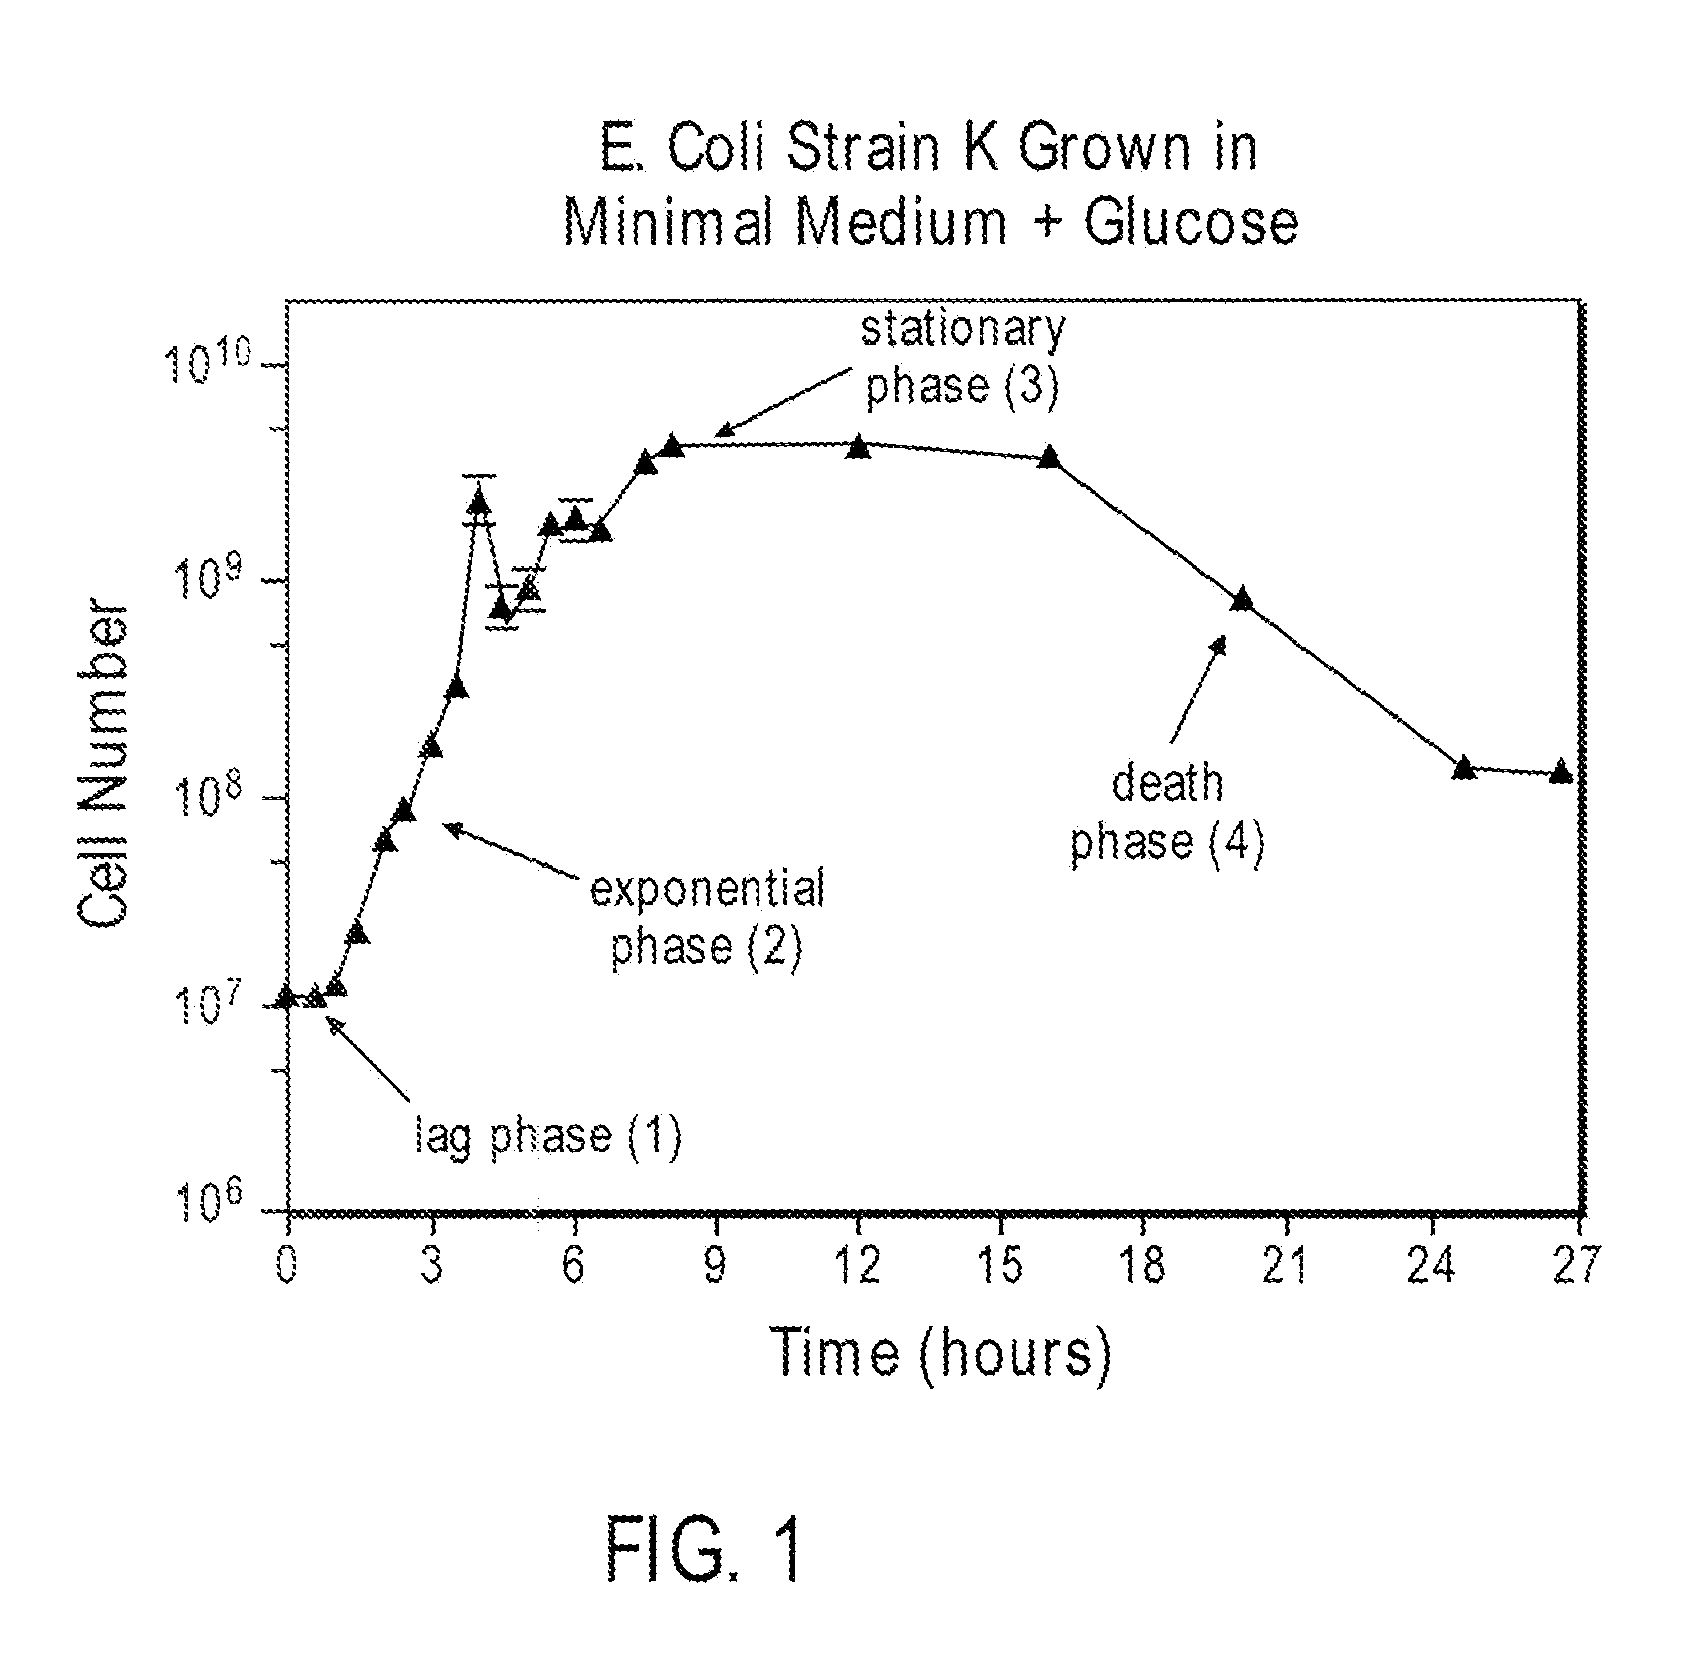 Systems and methods for large-scale production and harvesting of oil-rich algae